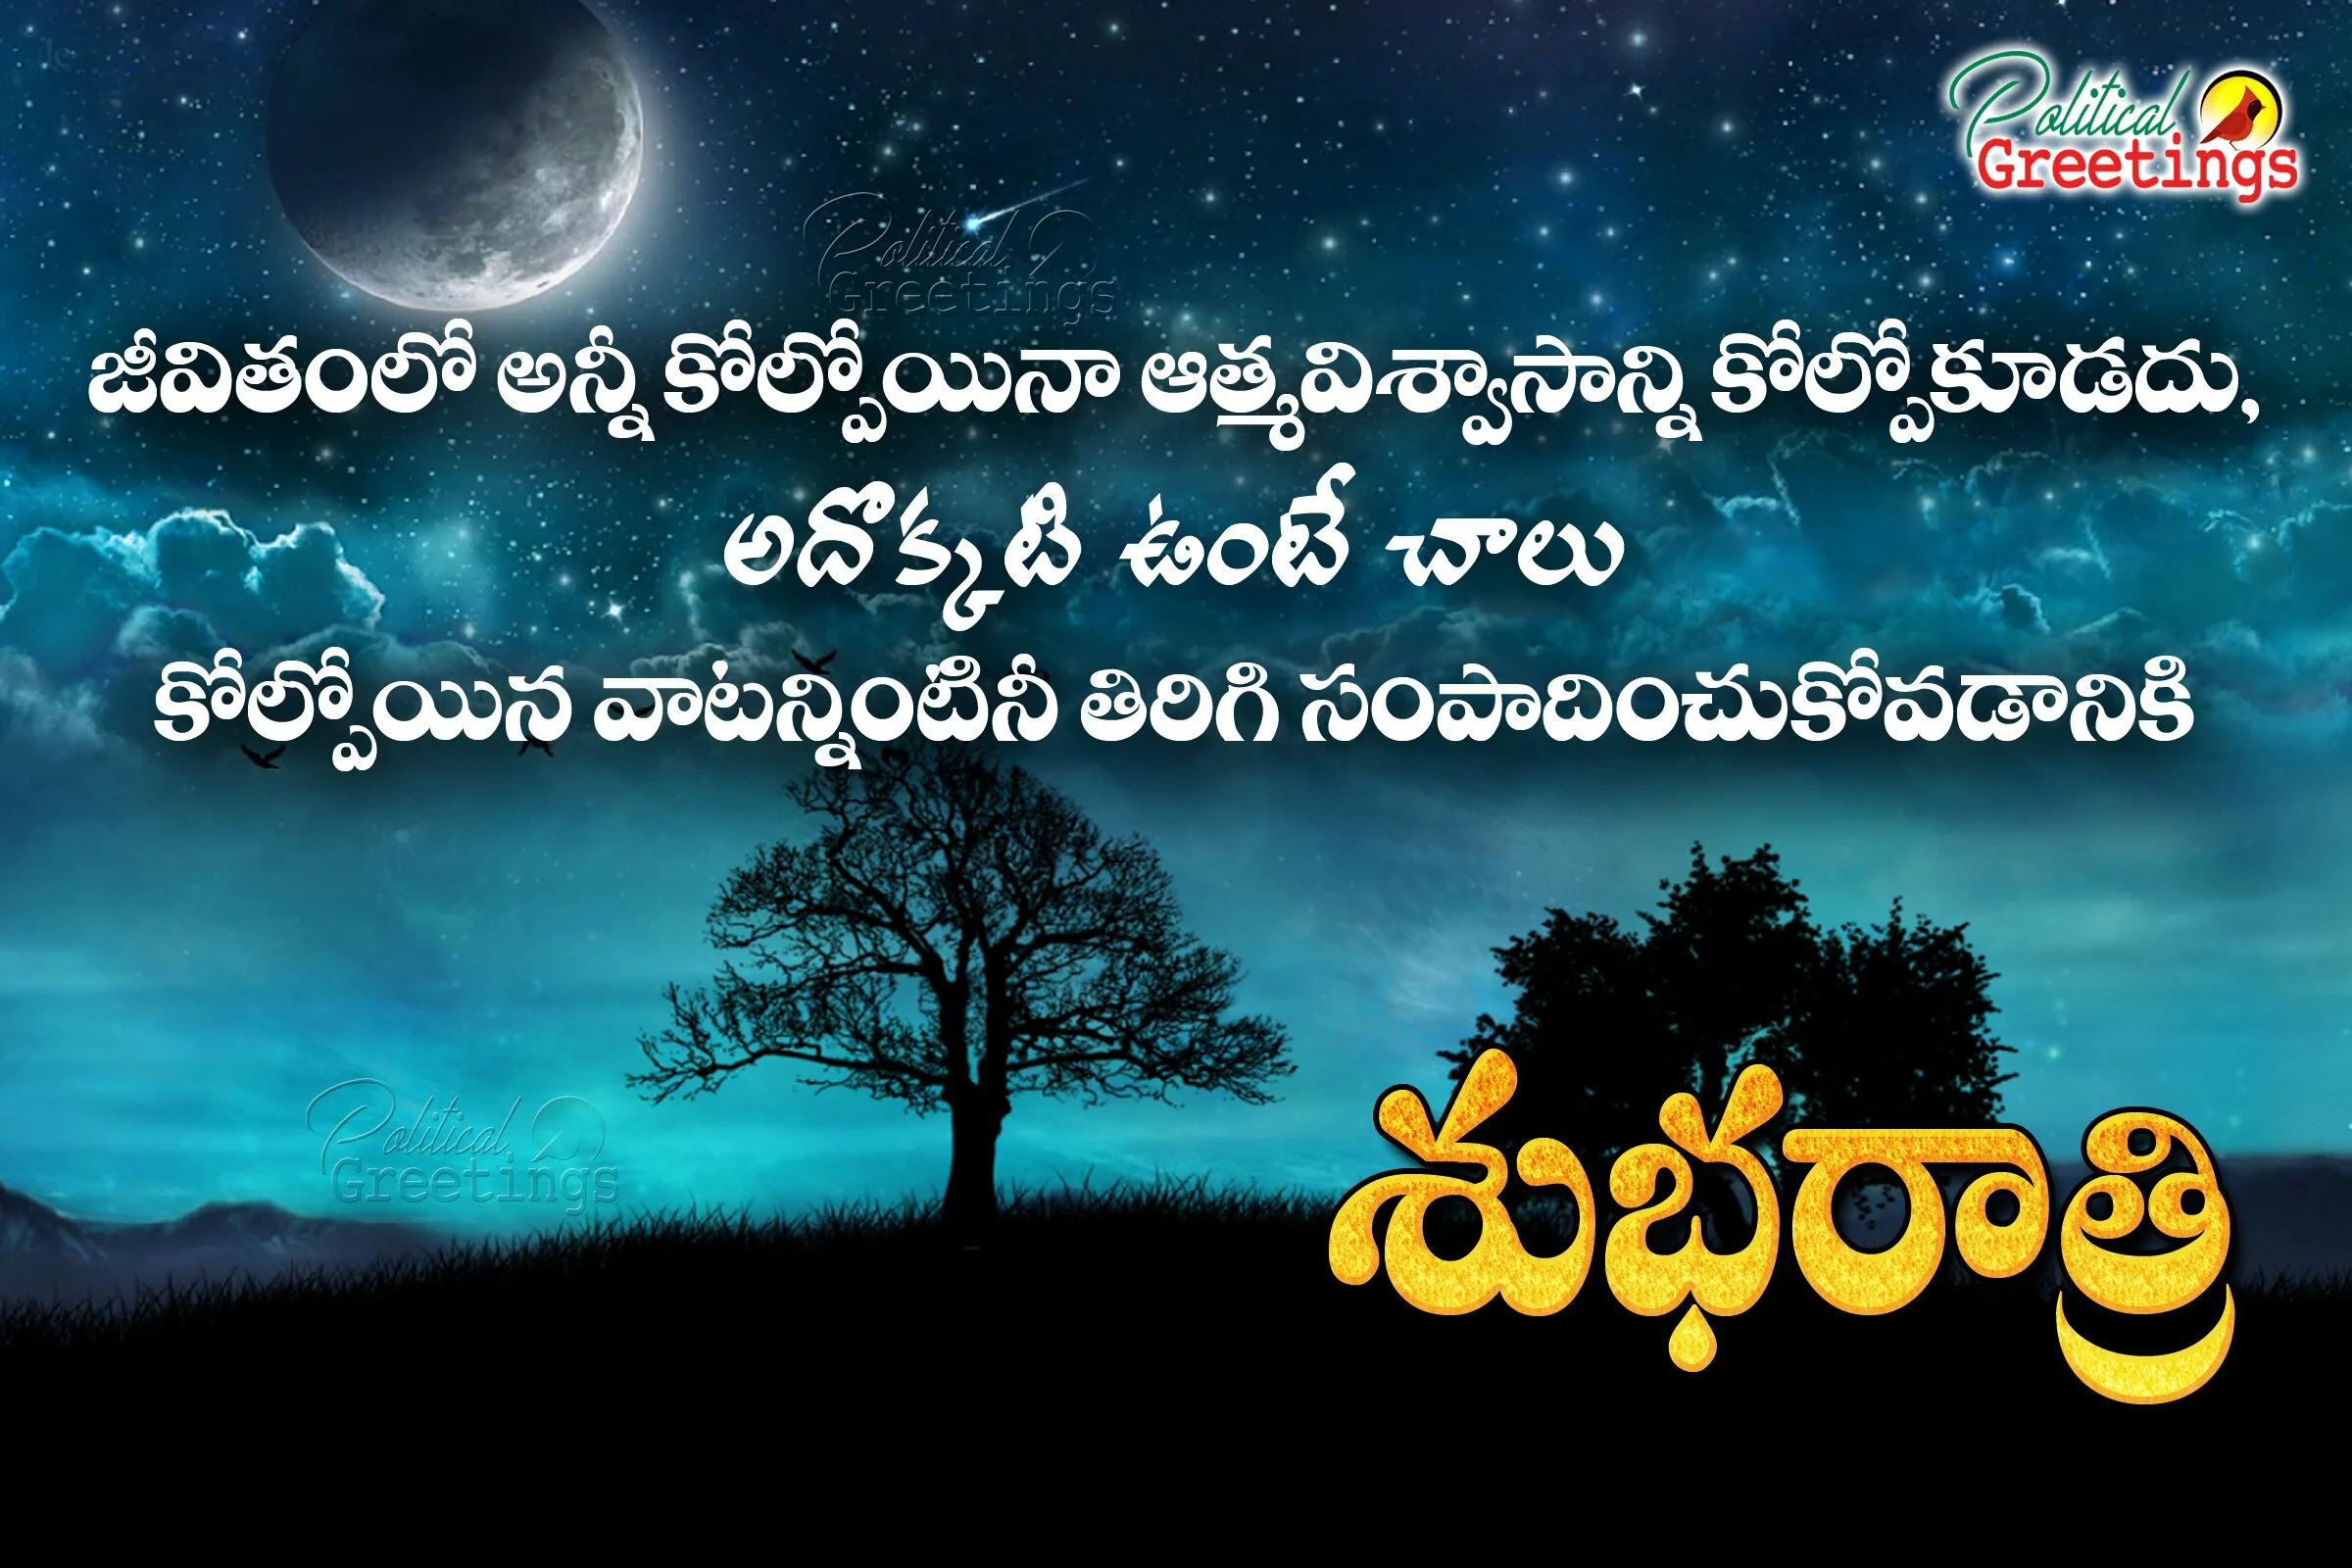 best good Night telugu quotes about life with nice picture quotes politicalgreetings